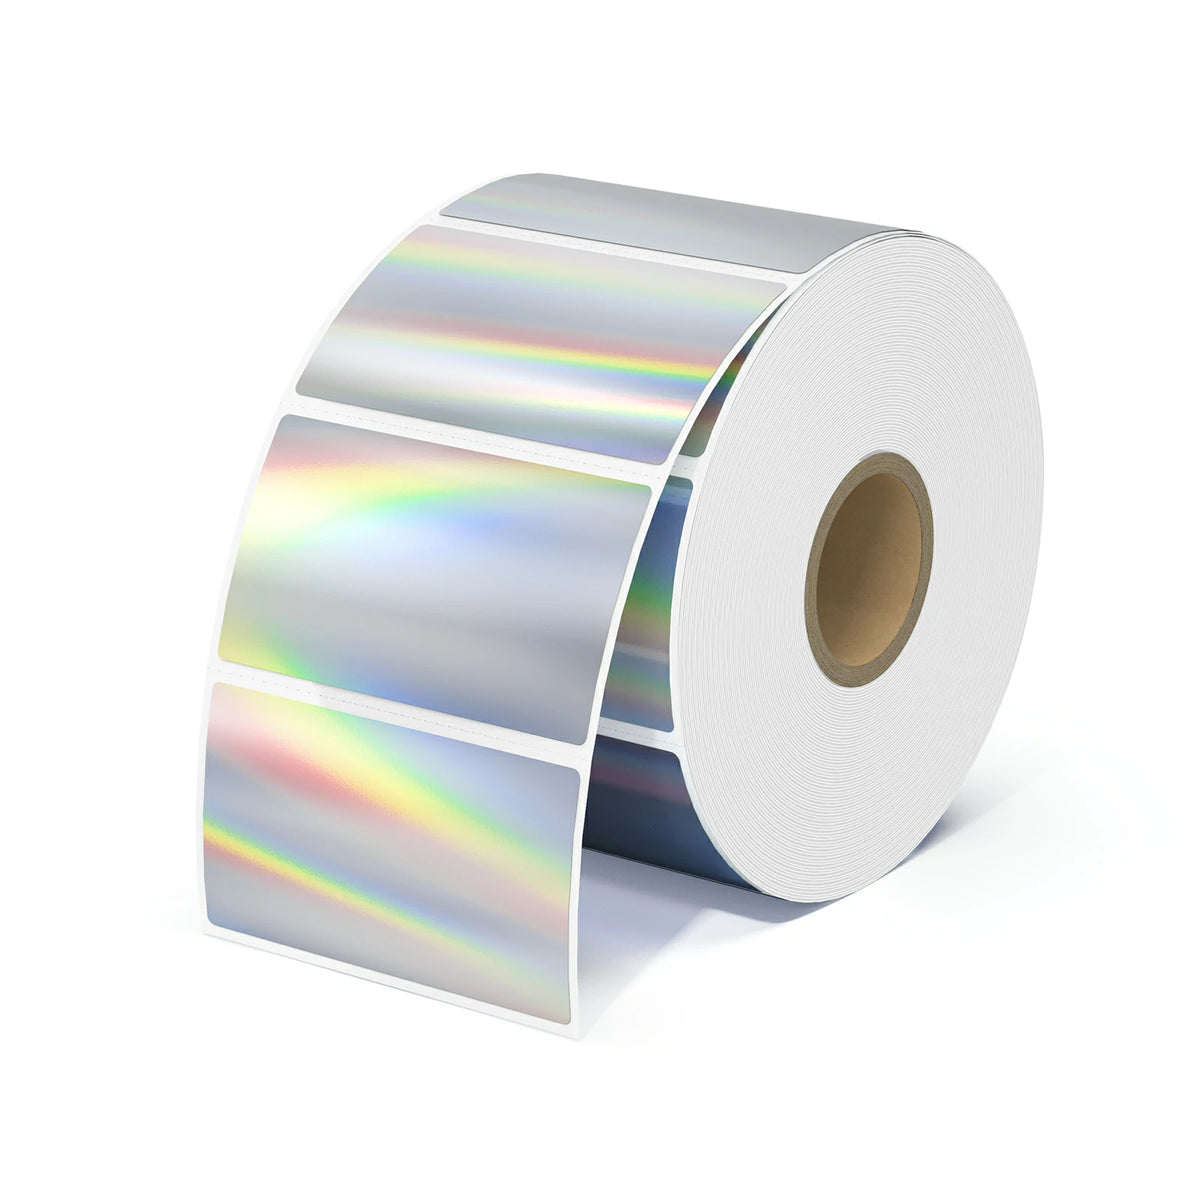 MUNBYN holographic silver rectangle thermal labels are 2.25" x 1.25".